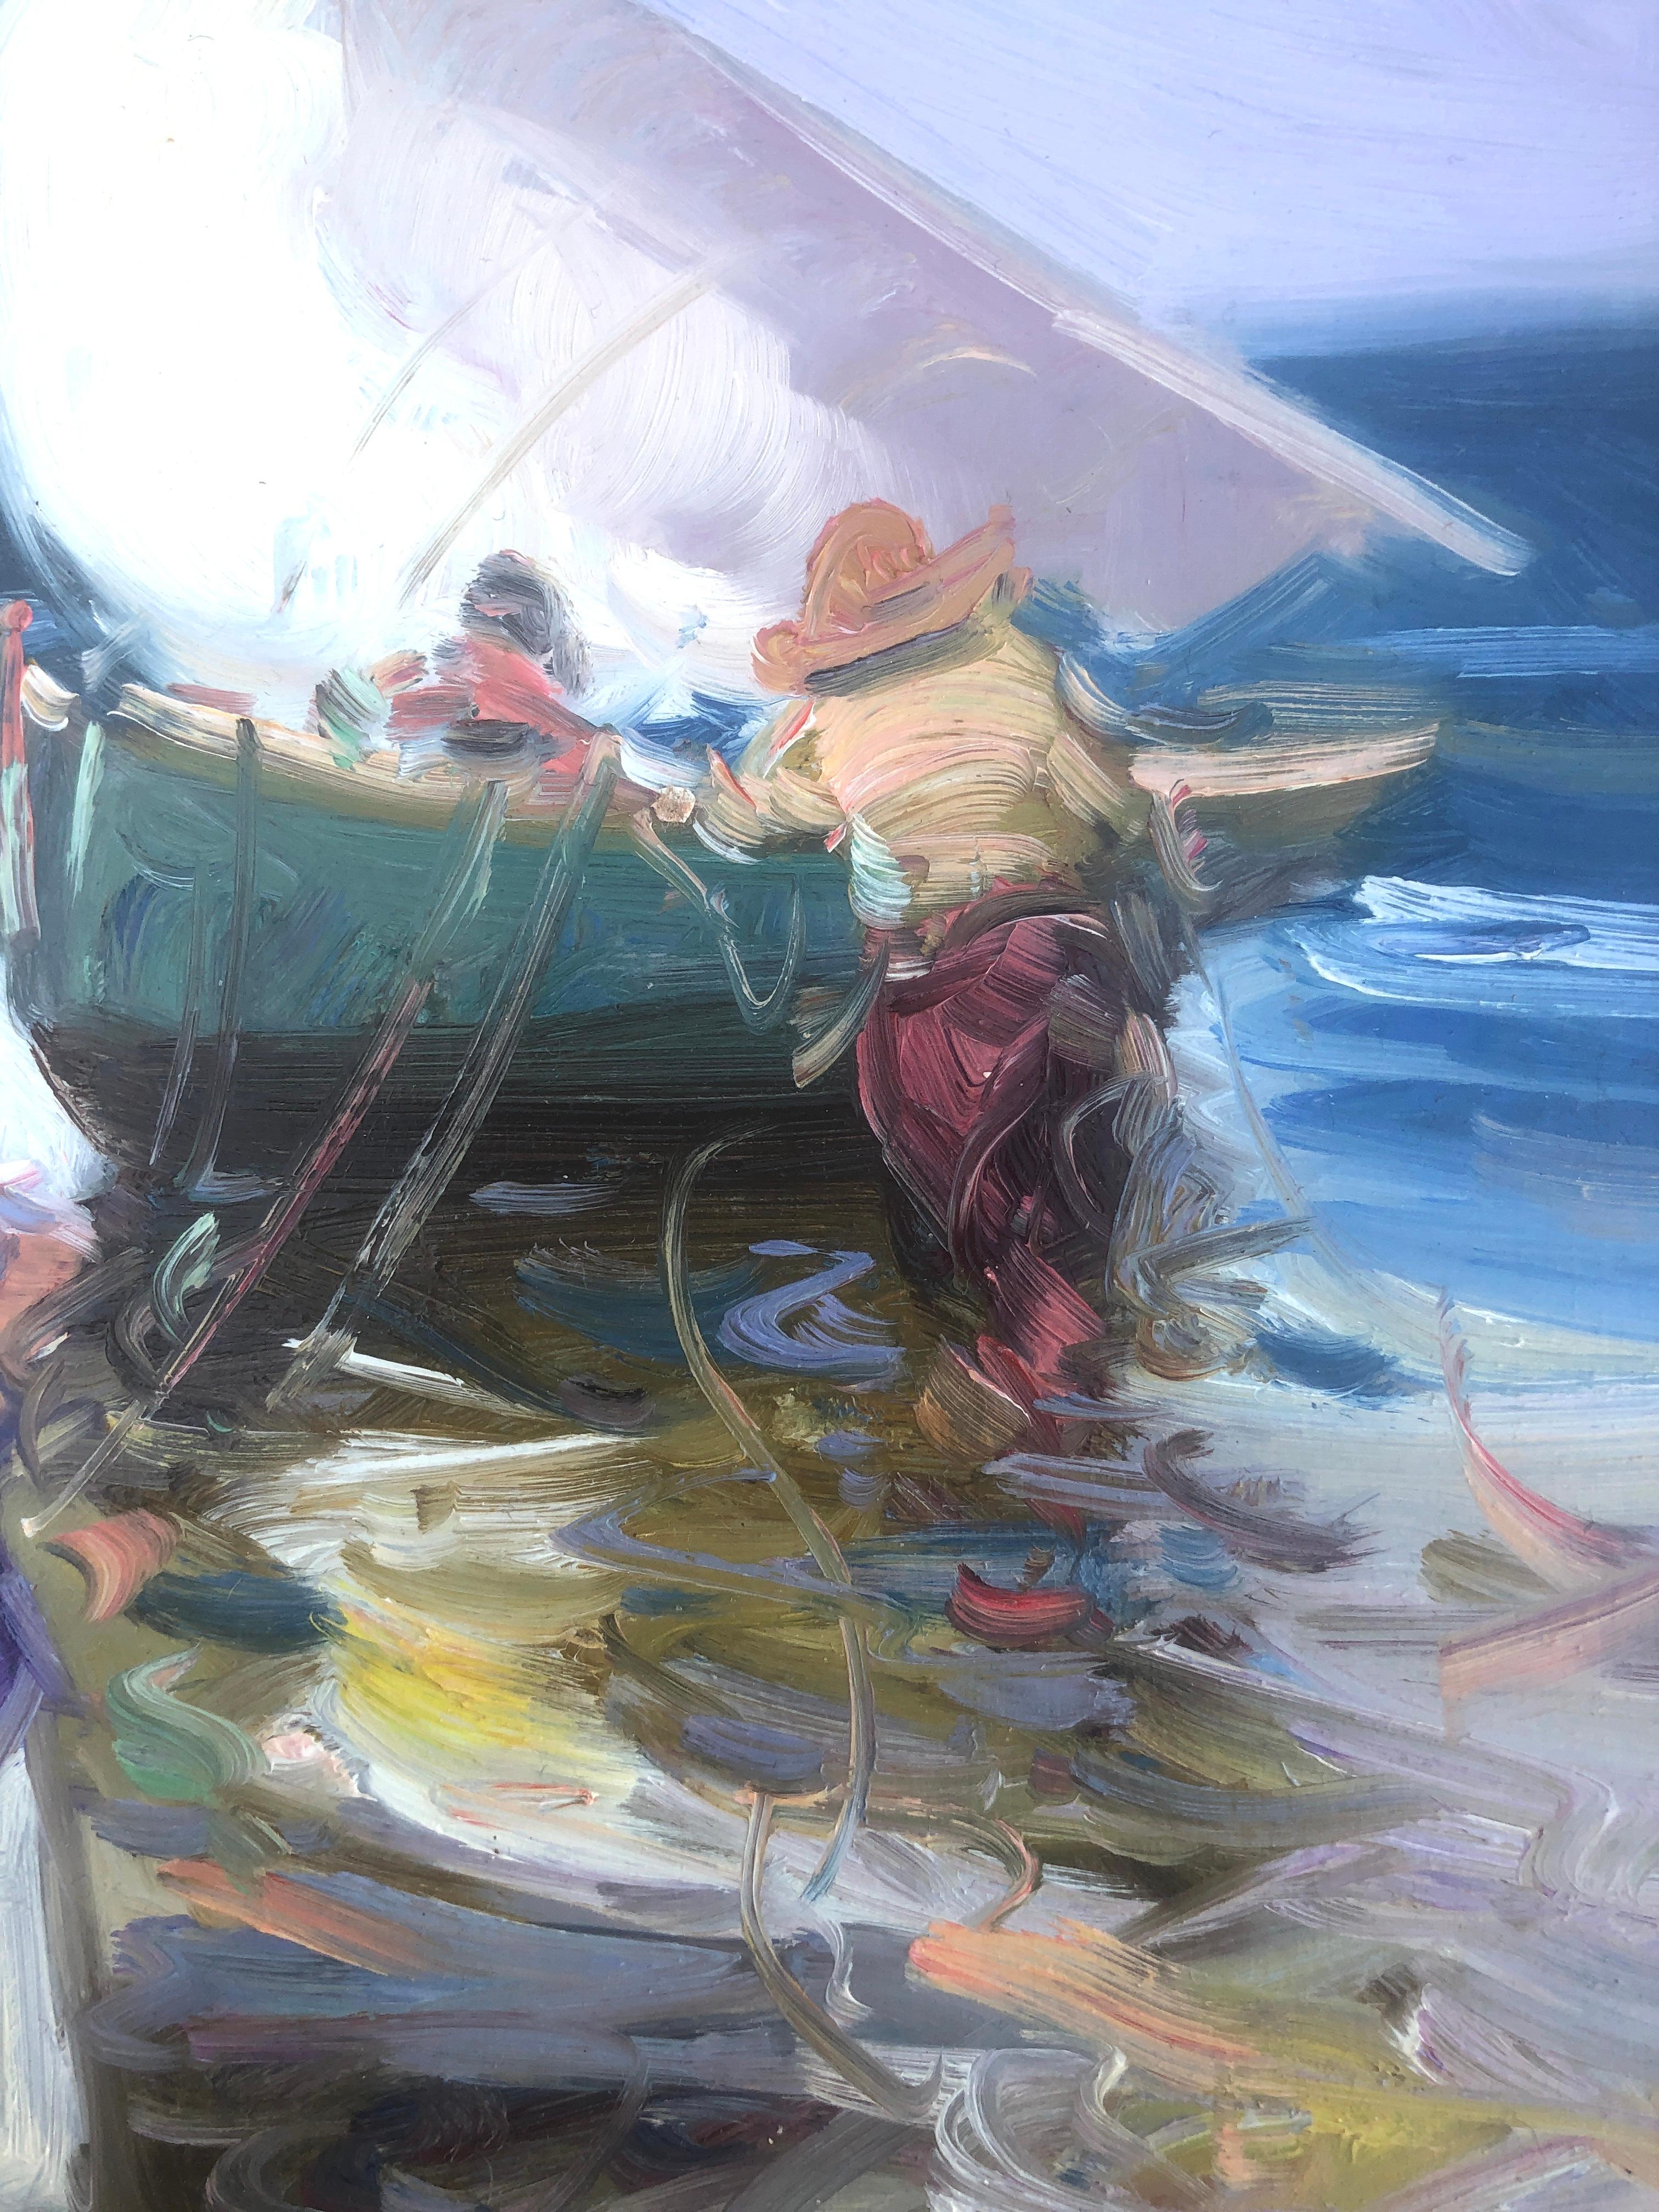 Gabriel Casarrubios Martín (1953) - Fishermen - Oil on panel
Oil size 27x22 cm.
Frameless.

Gabriel Casarrubios Martín (1953)

The Toledo artist trained in Fine Arts in Madrid, at the San Fernando Faculty and at the UCM. In the work of Gabriel